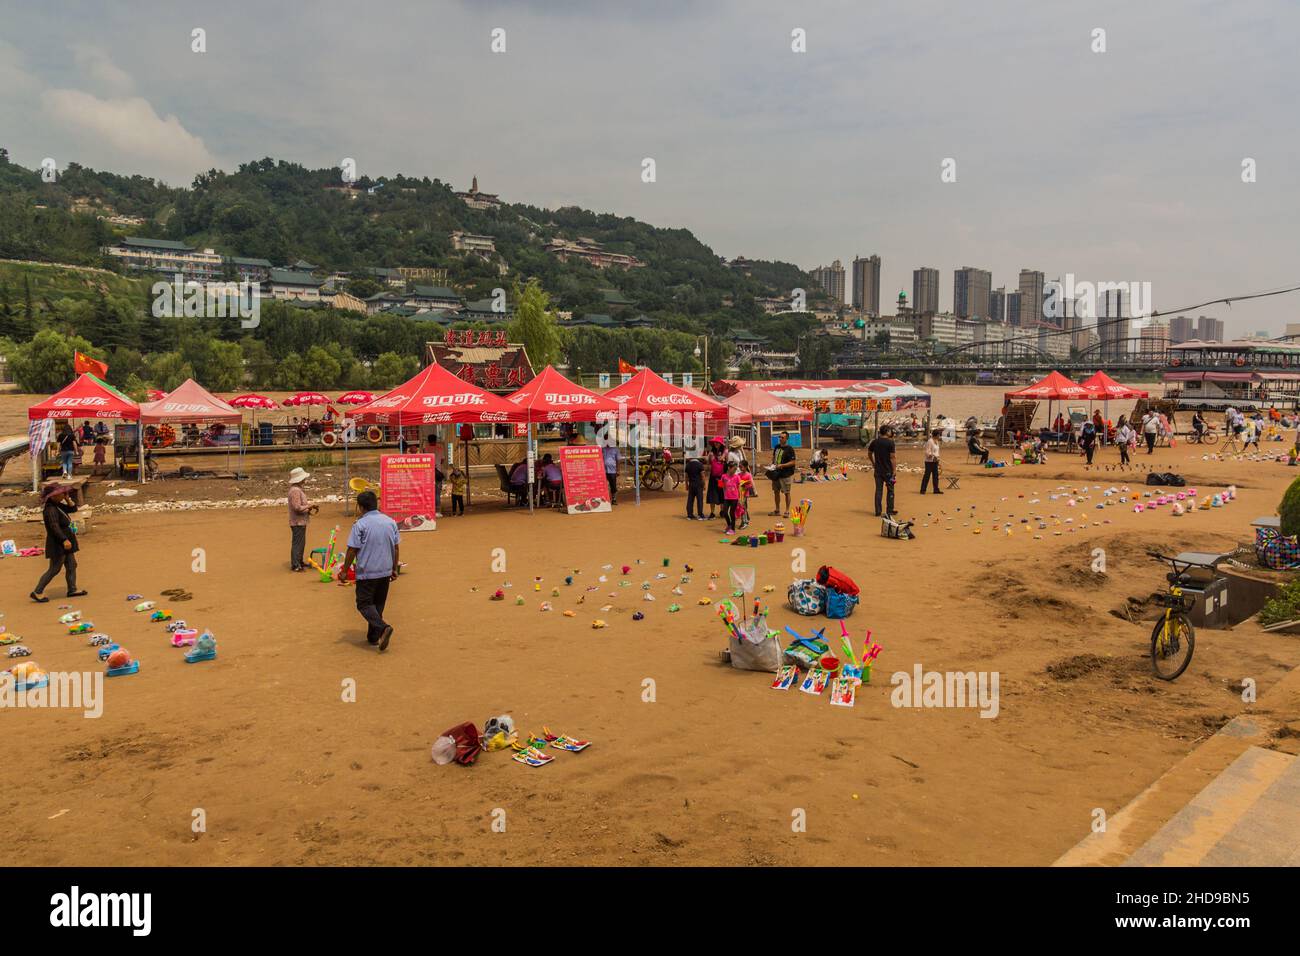 LANZHOU, CHINA - AUGUST 18, 2018: Market at the coast of Yellow river Huang He in Lanzhou, Gansu Province, China Stock Photo